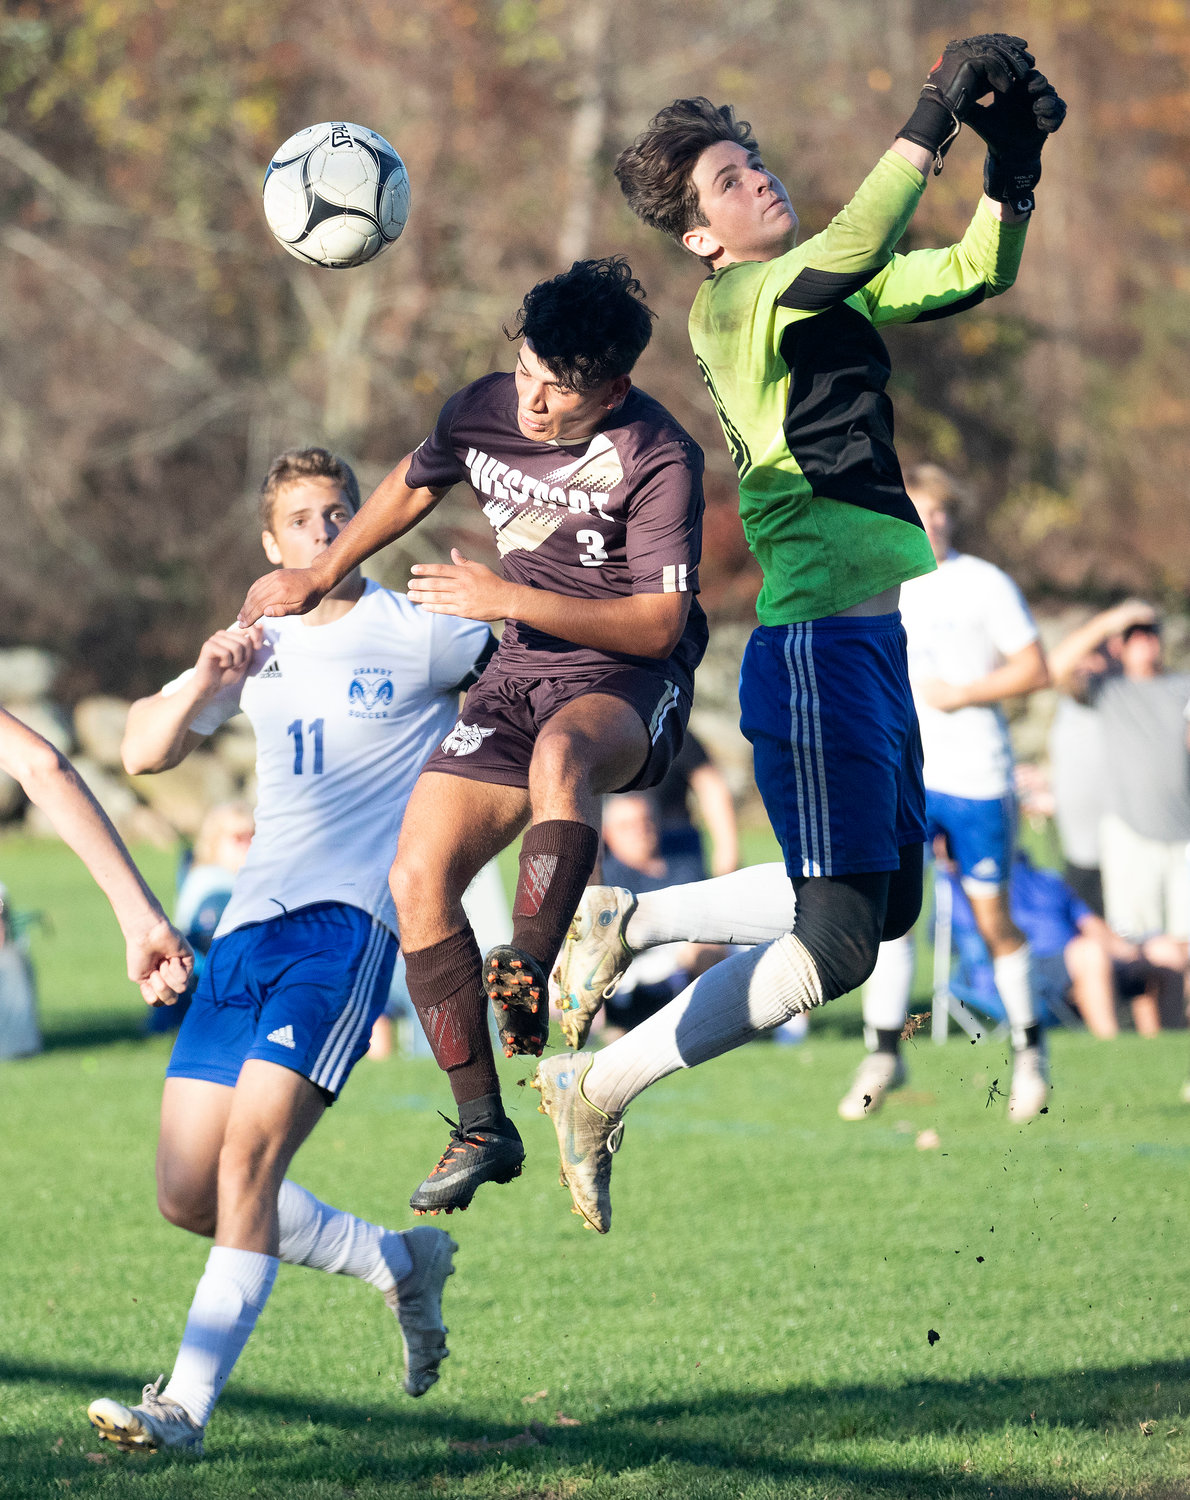 Midfielder Antonio Dutra Africano elevates to head a cross, but the ball caromed over the net. The senior later scored the Wildcats second goal of the game on a free kick from midfield.